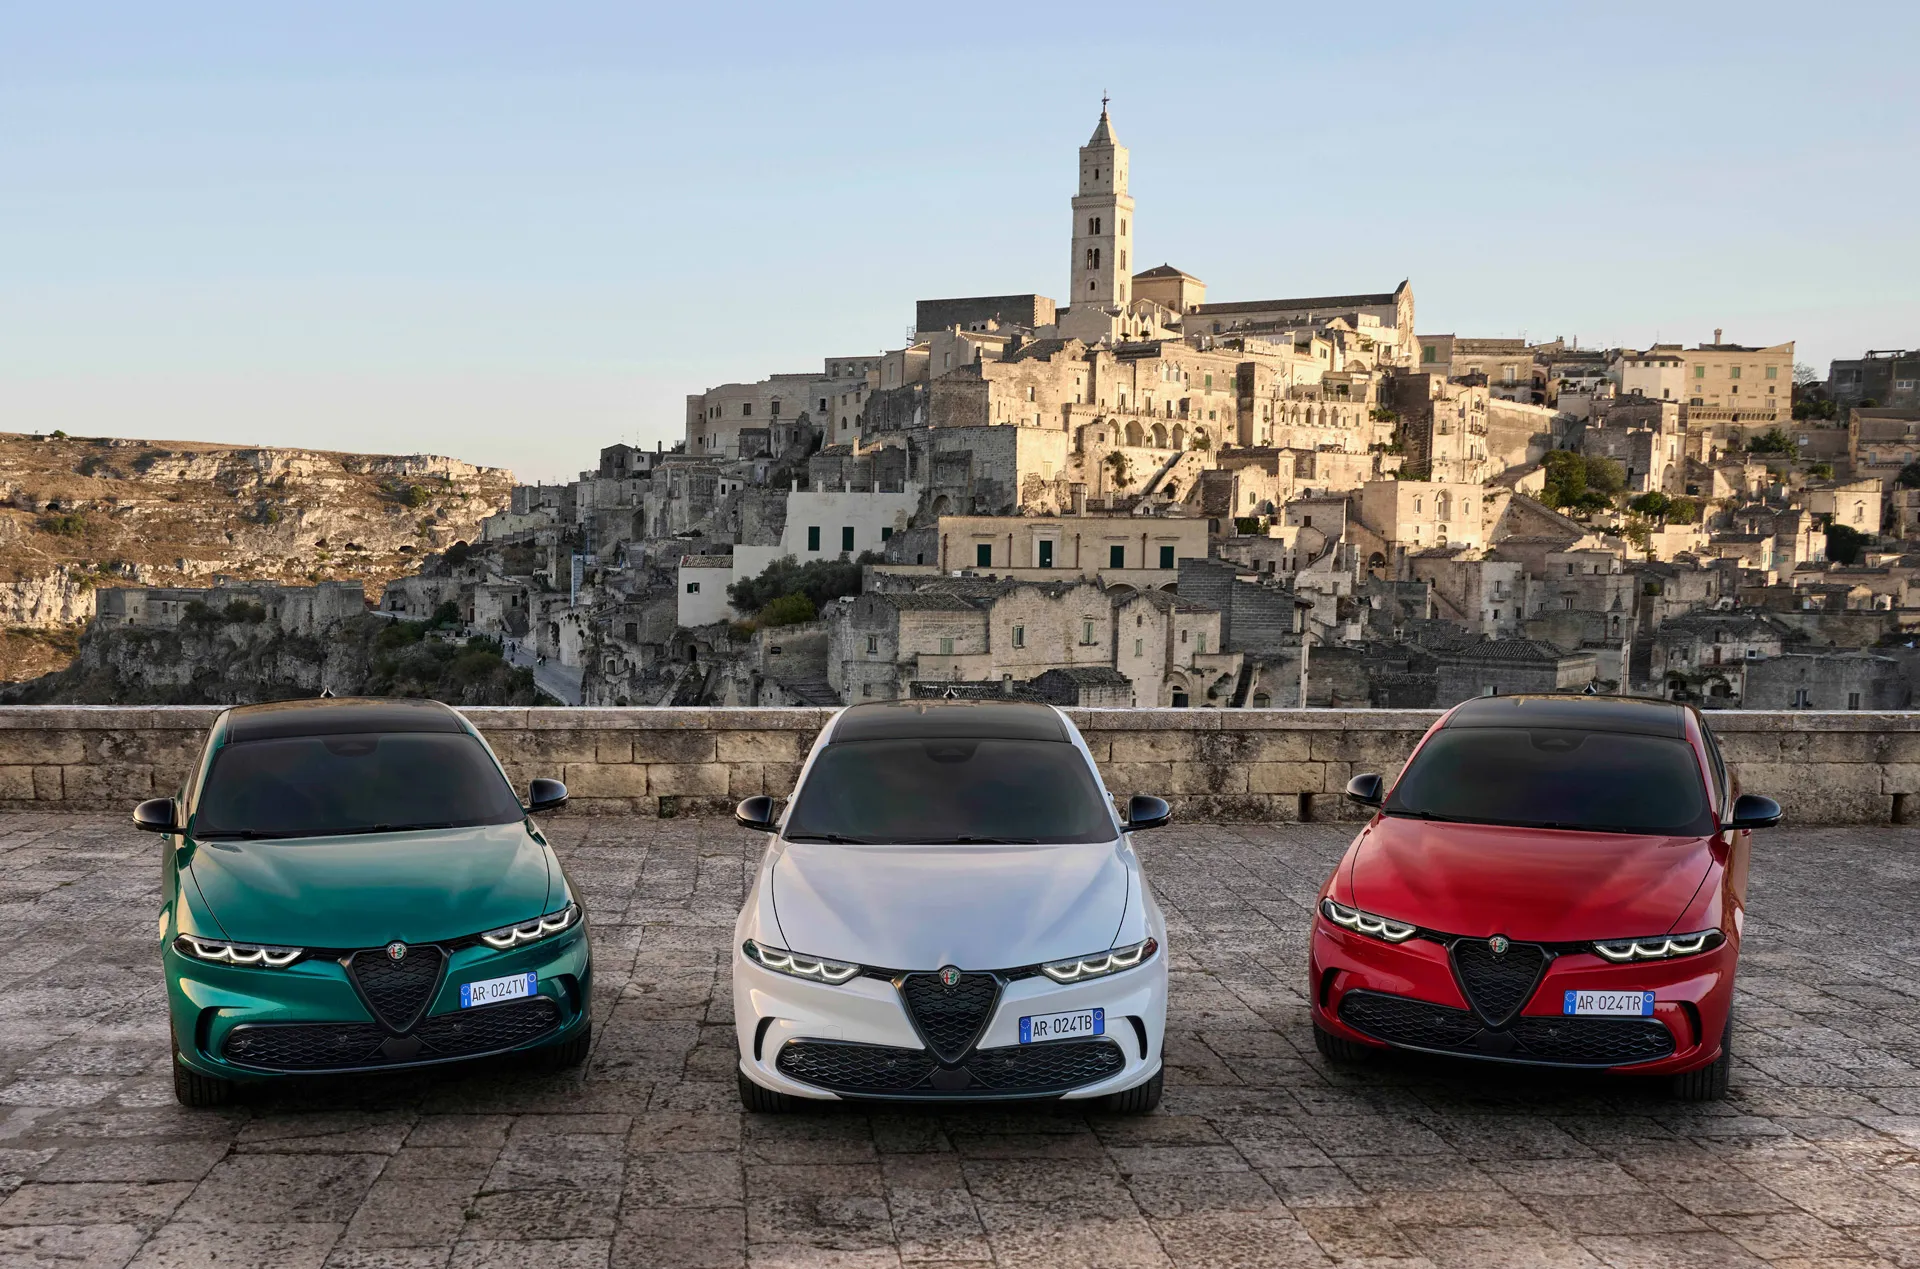 Tributo Italiano is Alfa Romeo’s first world particular collection